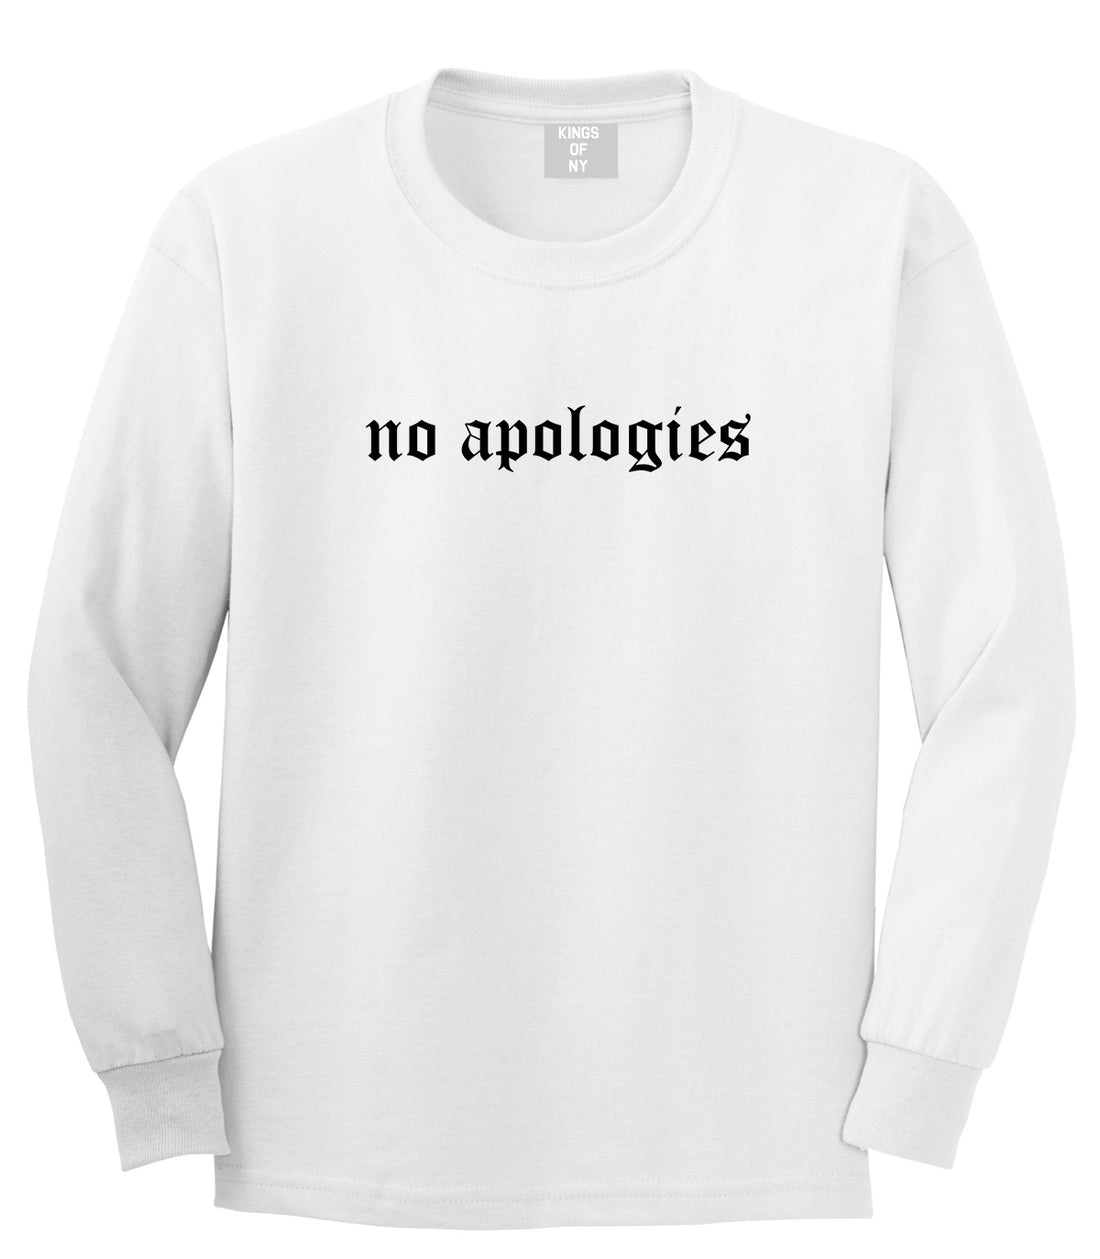 No Apologies Old English Mens Long Sleeve T-Shirt White by Kings Of NY